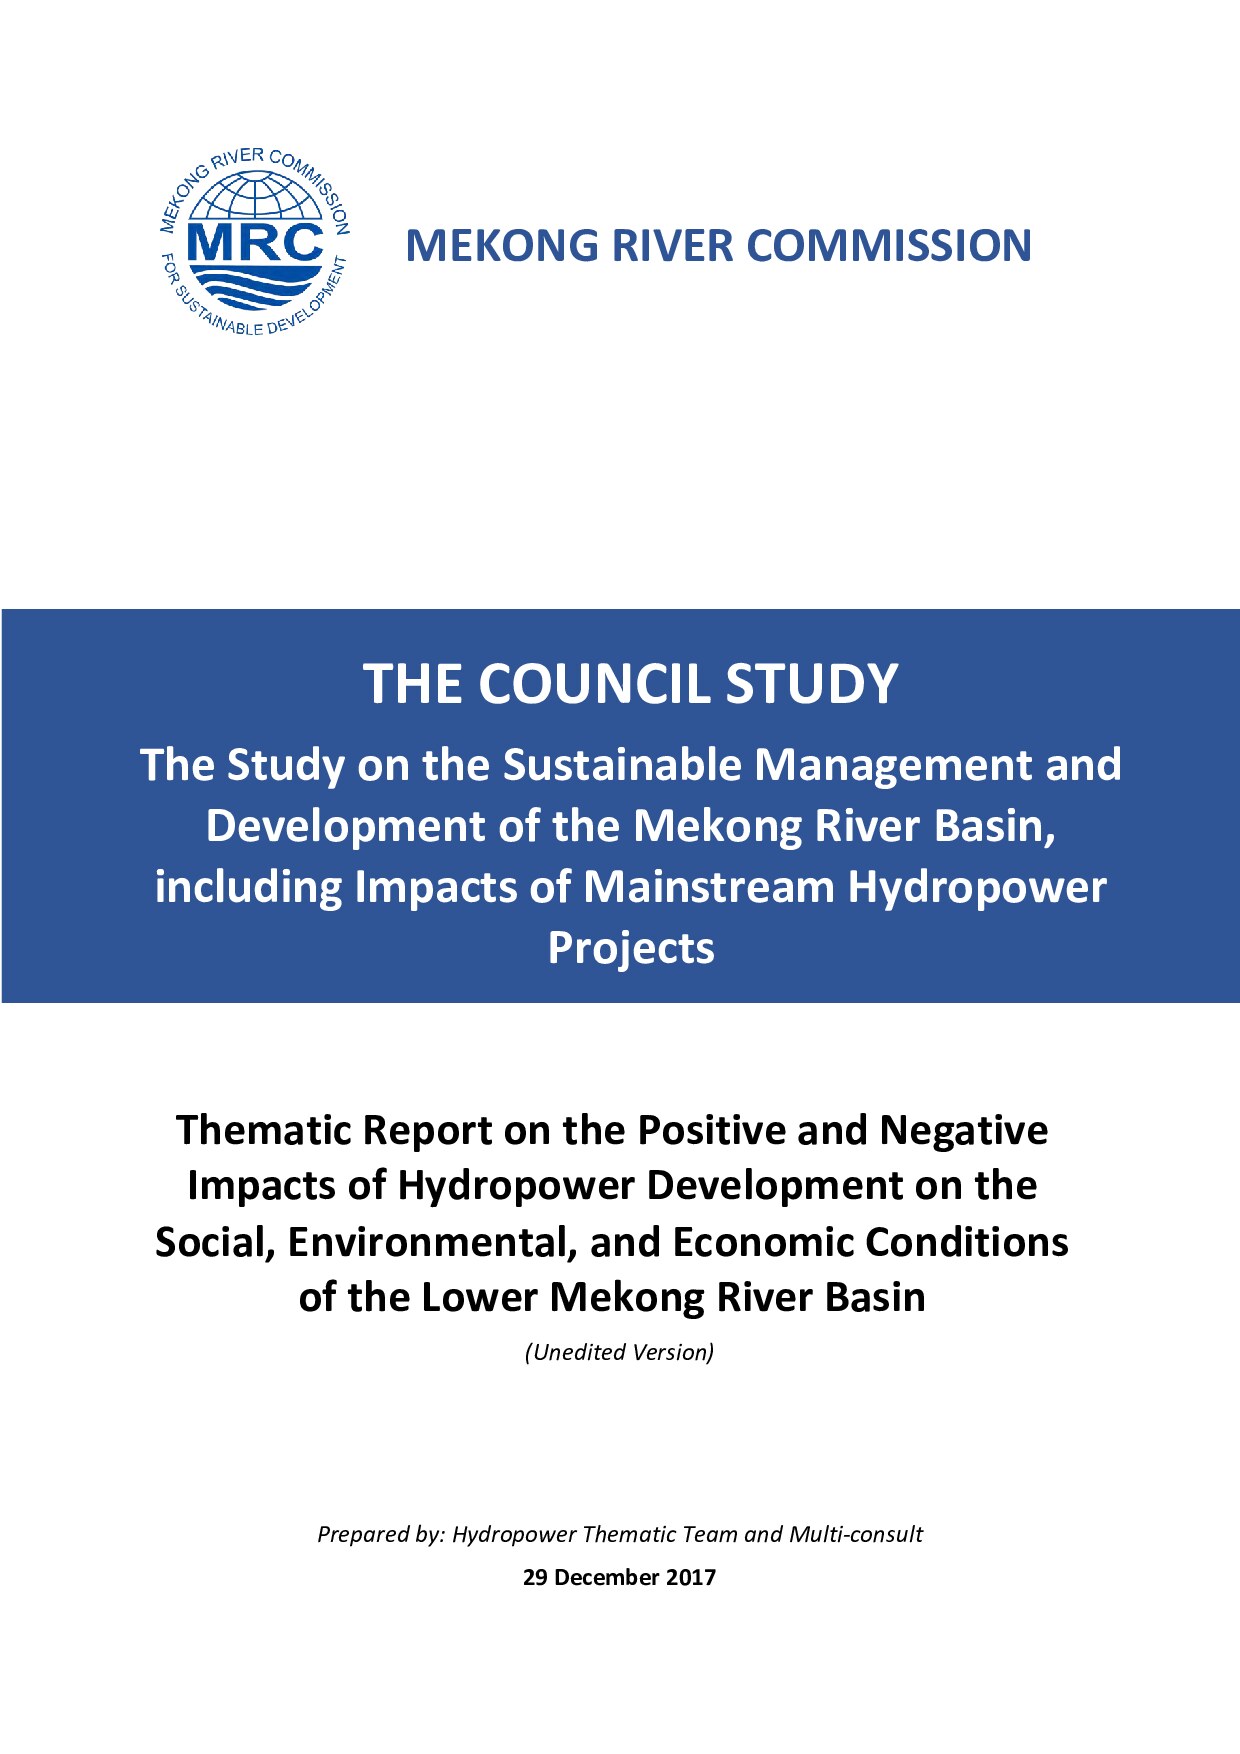 Thematic Report on the Positive and Negative Impacts of Hydropower Development on the Social, Environmental, and Economic Conditions of the Lower Mekong River Basin